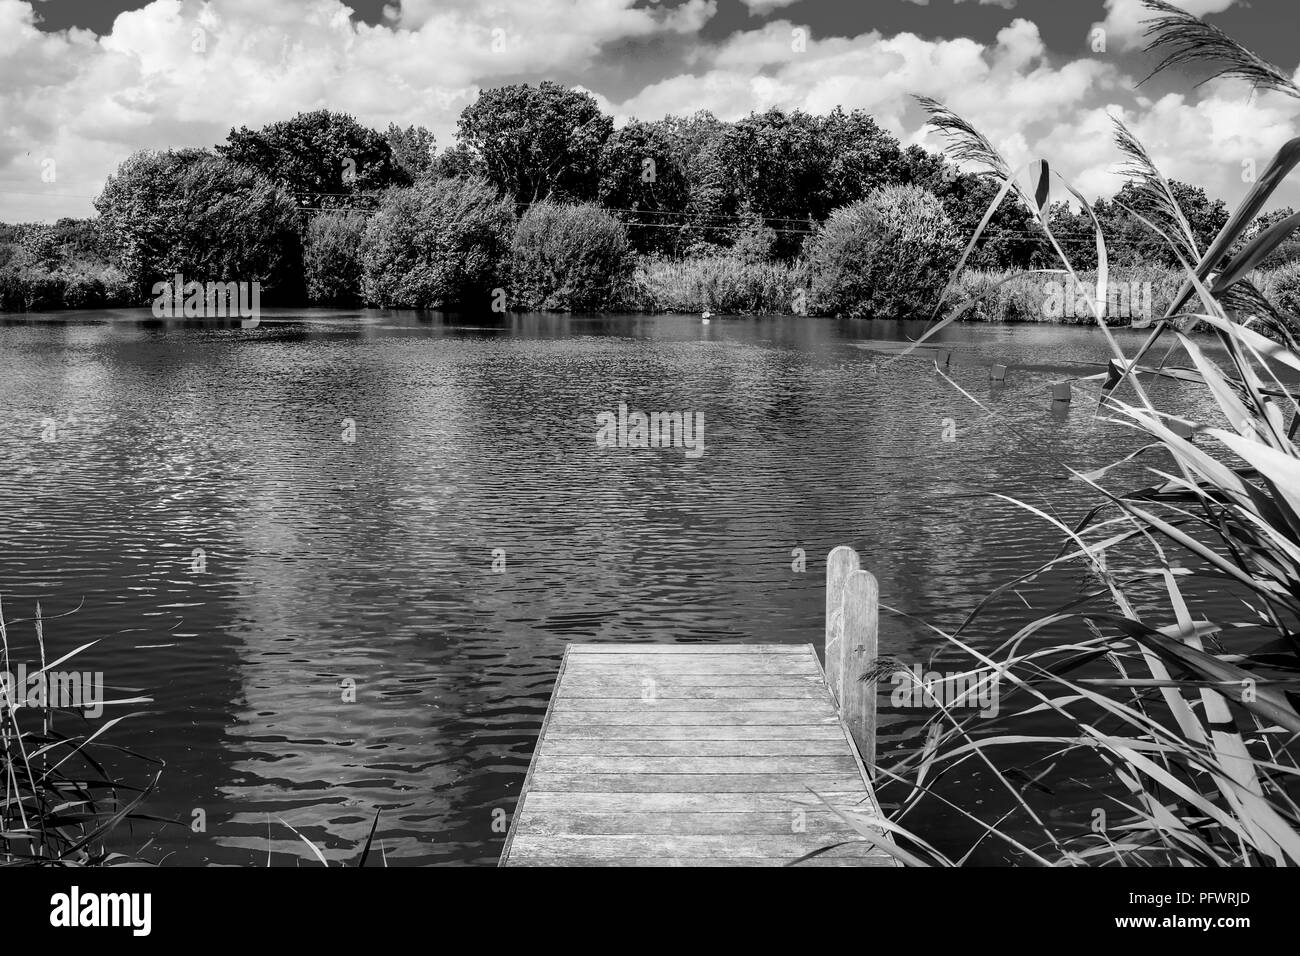 straight wooden foot jetty jutting out over a calm swimming lake, trees in the background, sunny day with clouds and grasses surrounding the lake, bla Stock Photo